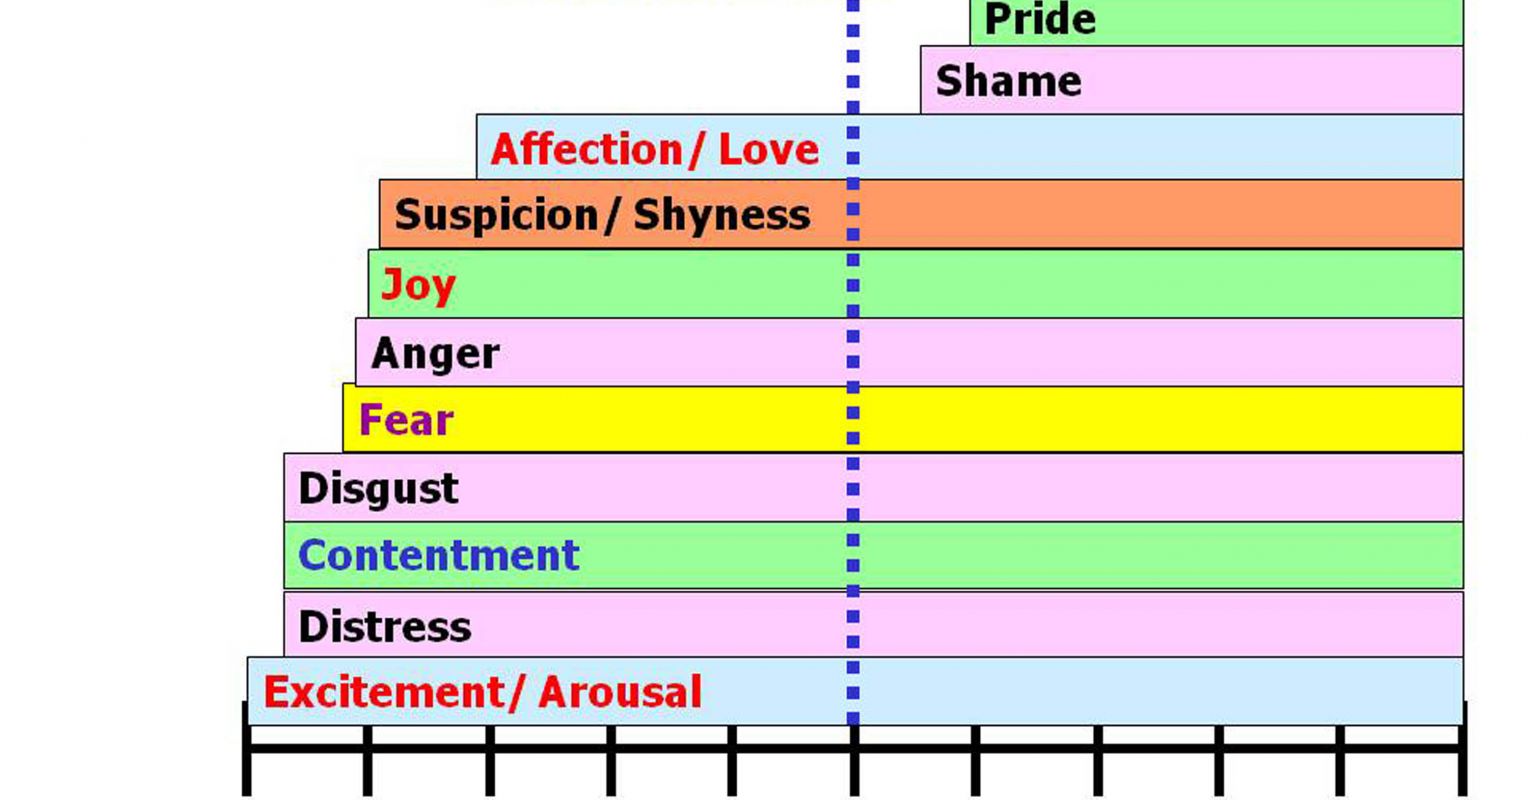 III. How Dogs Perceive Human Emotions